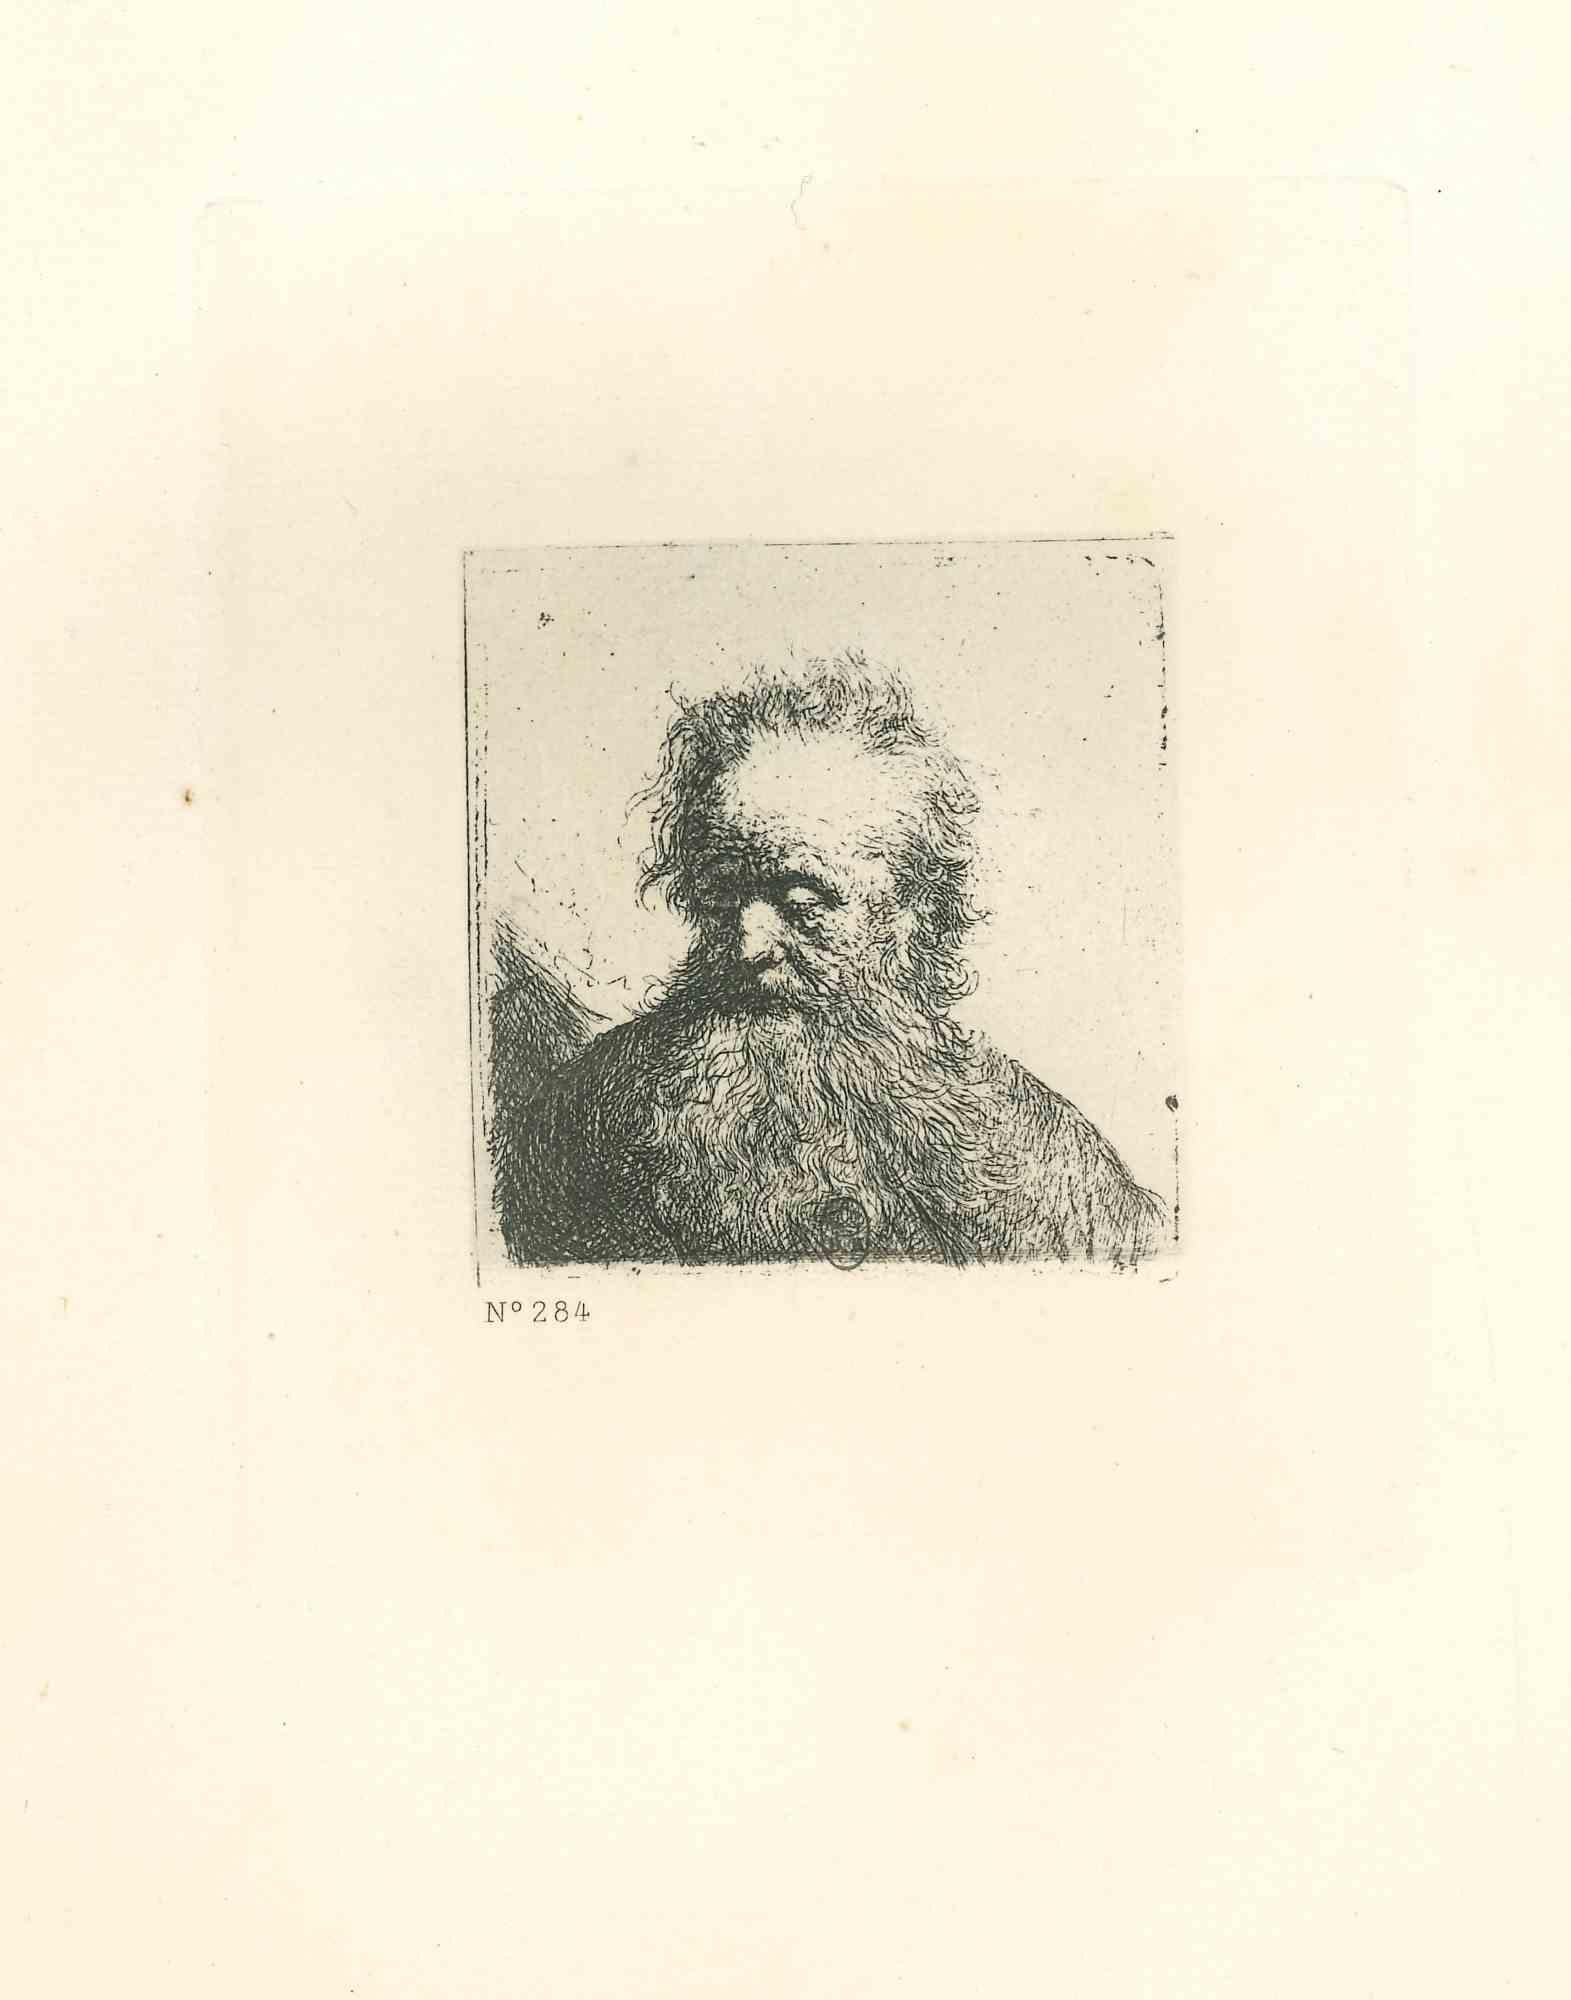 Charles Amand Durand Figurative Print - Old Man with Flowing Beard - Engraving after Rembrandt - 19th Century